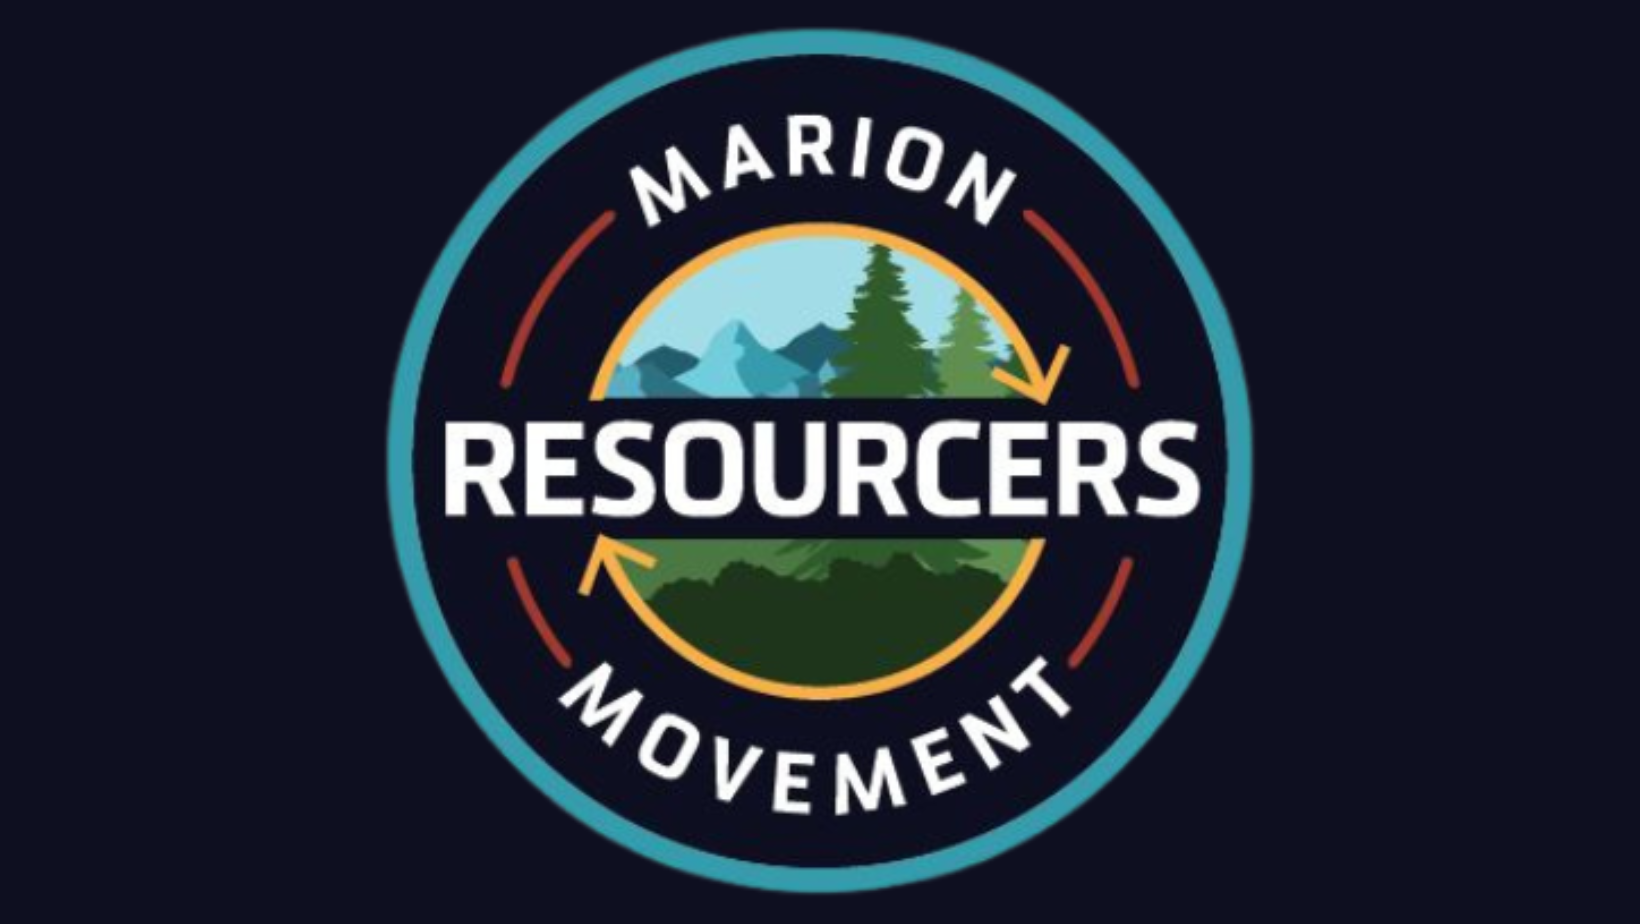 Marion Resourcers Movement logo